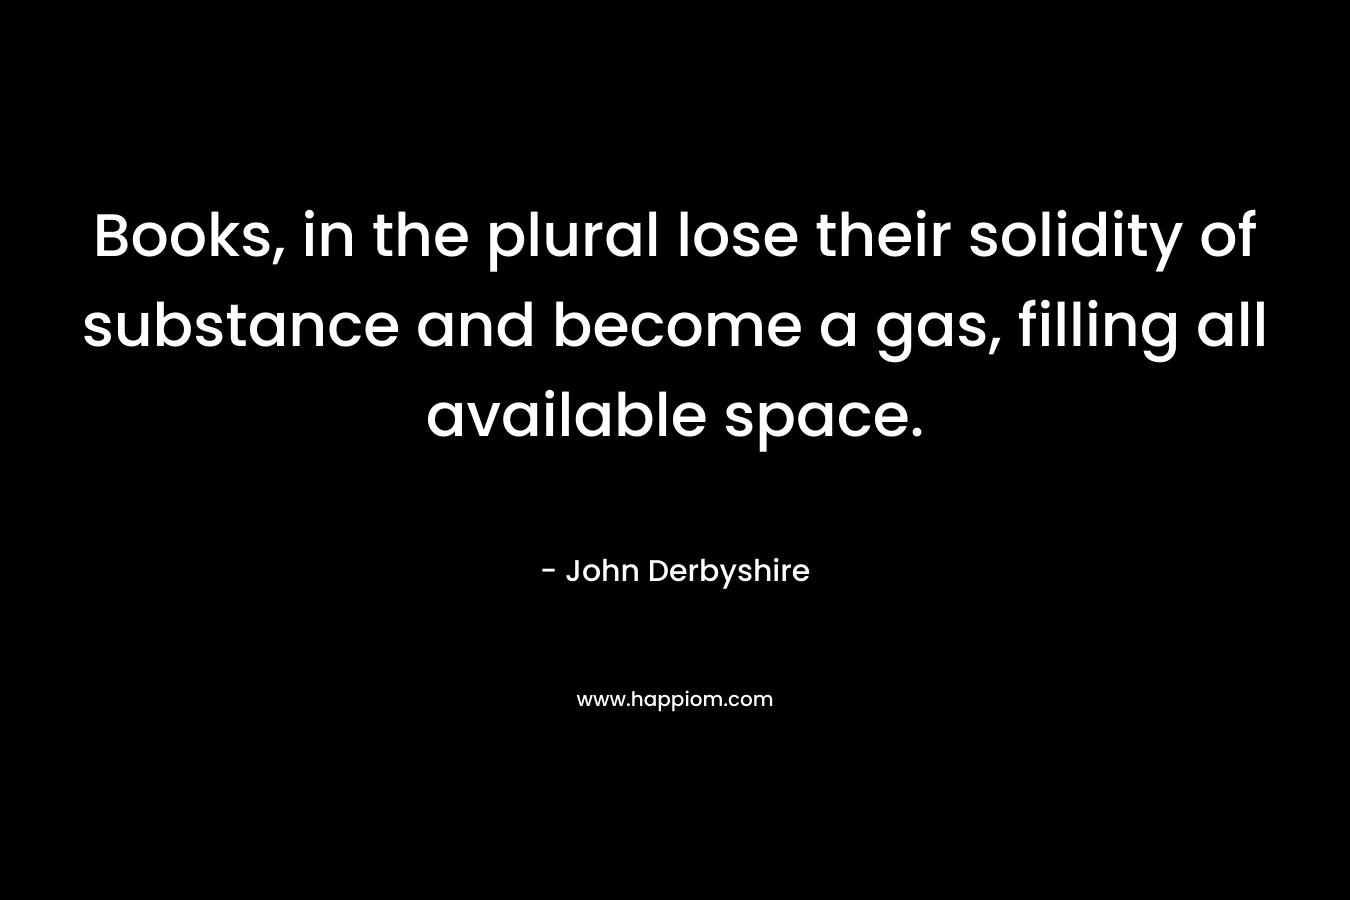 Books, in the plural lose their solidity of substance and become a gas, filling all available space.